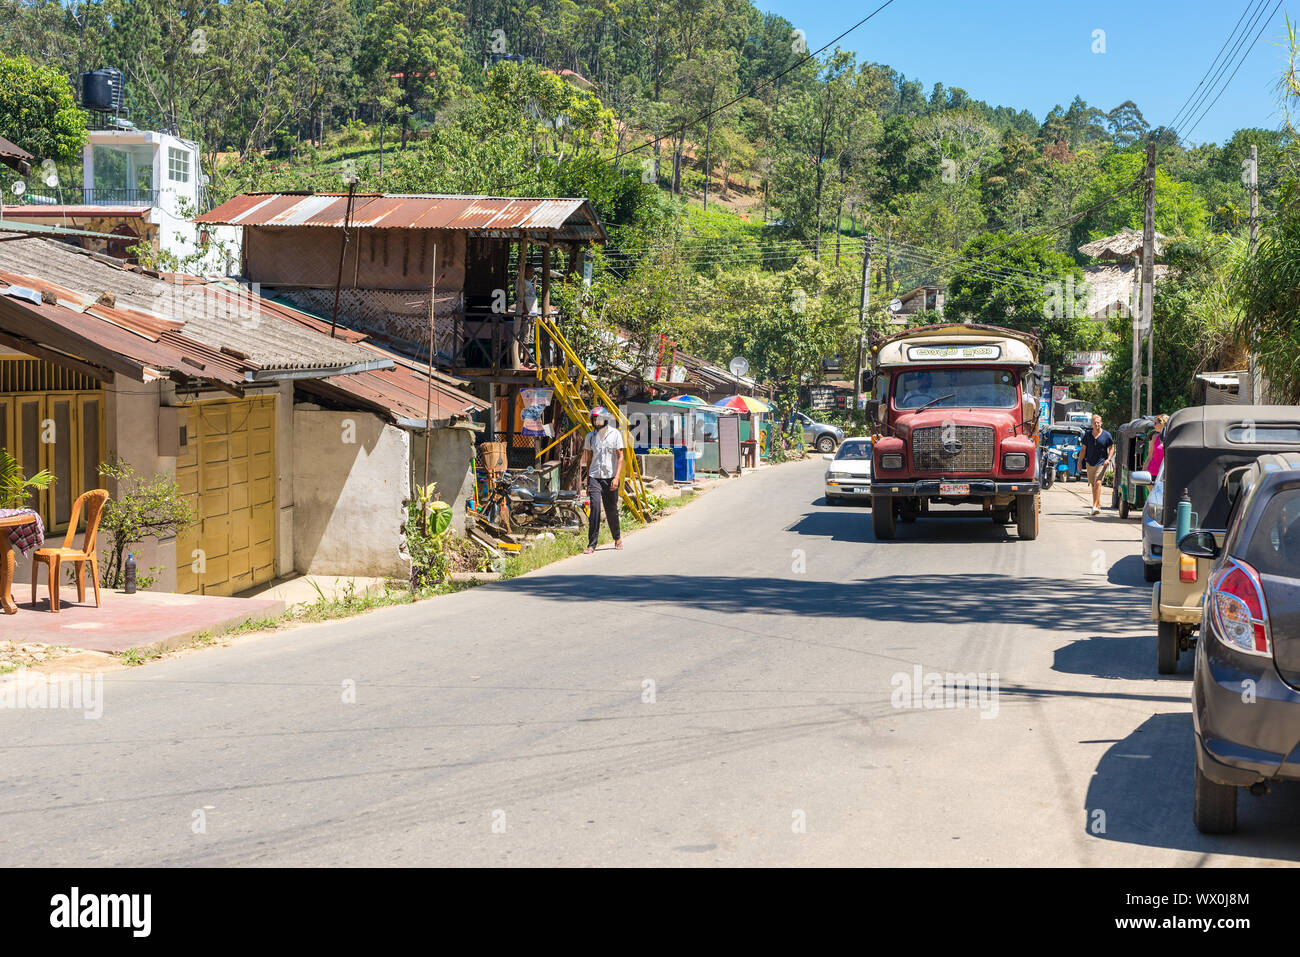 Little shops, food stands and stores in the primary retail street of Ella in Sri Lanka Stock Photo